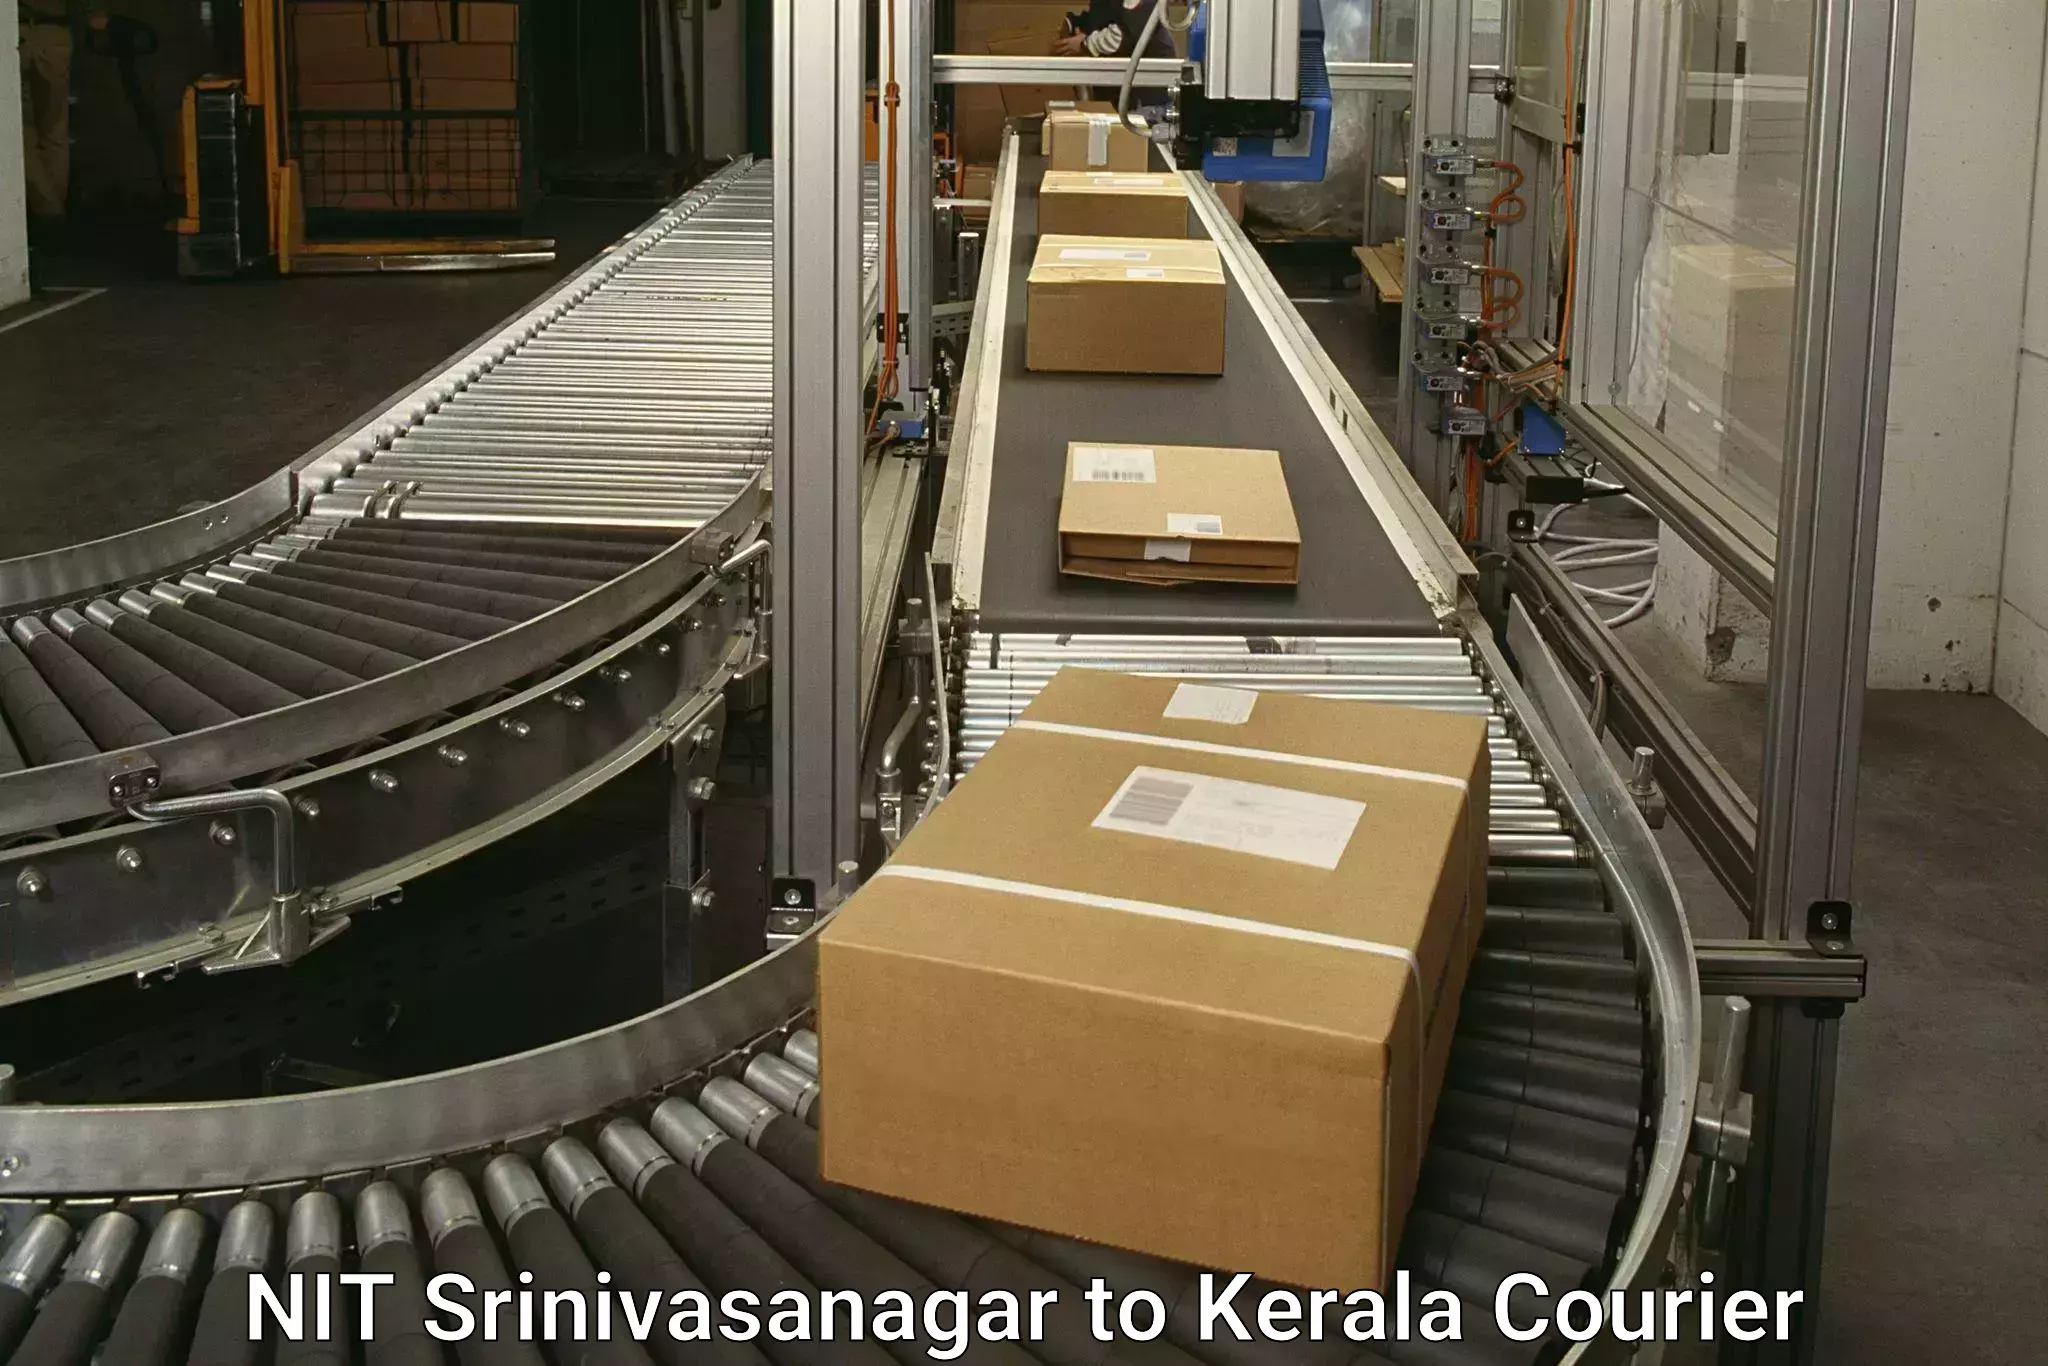 Punctual parcel services NIT Srinivasanagar to Cochin University of Science and Technology